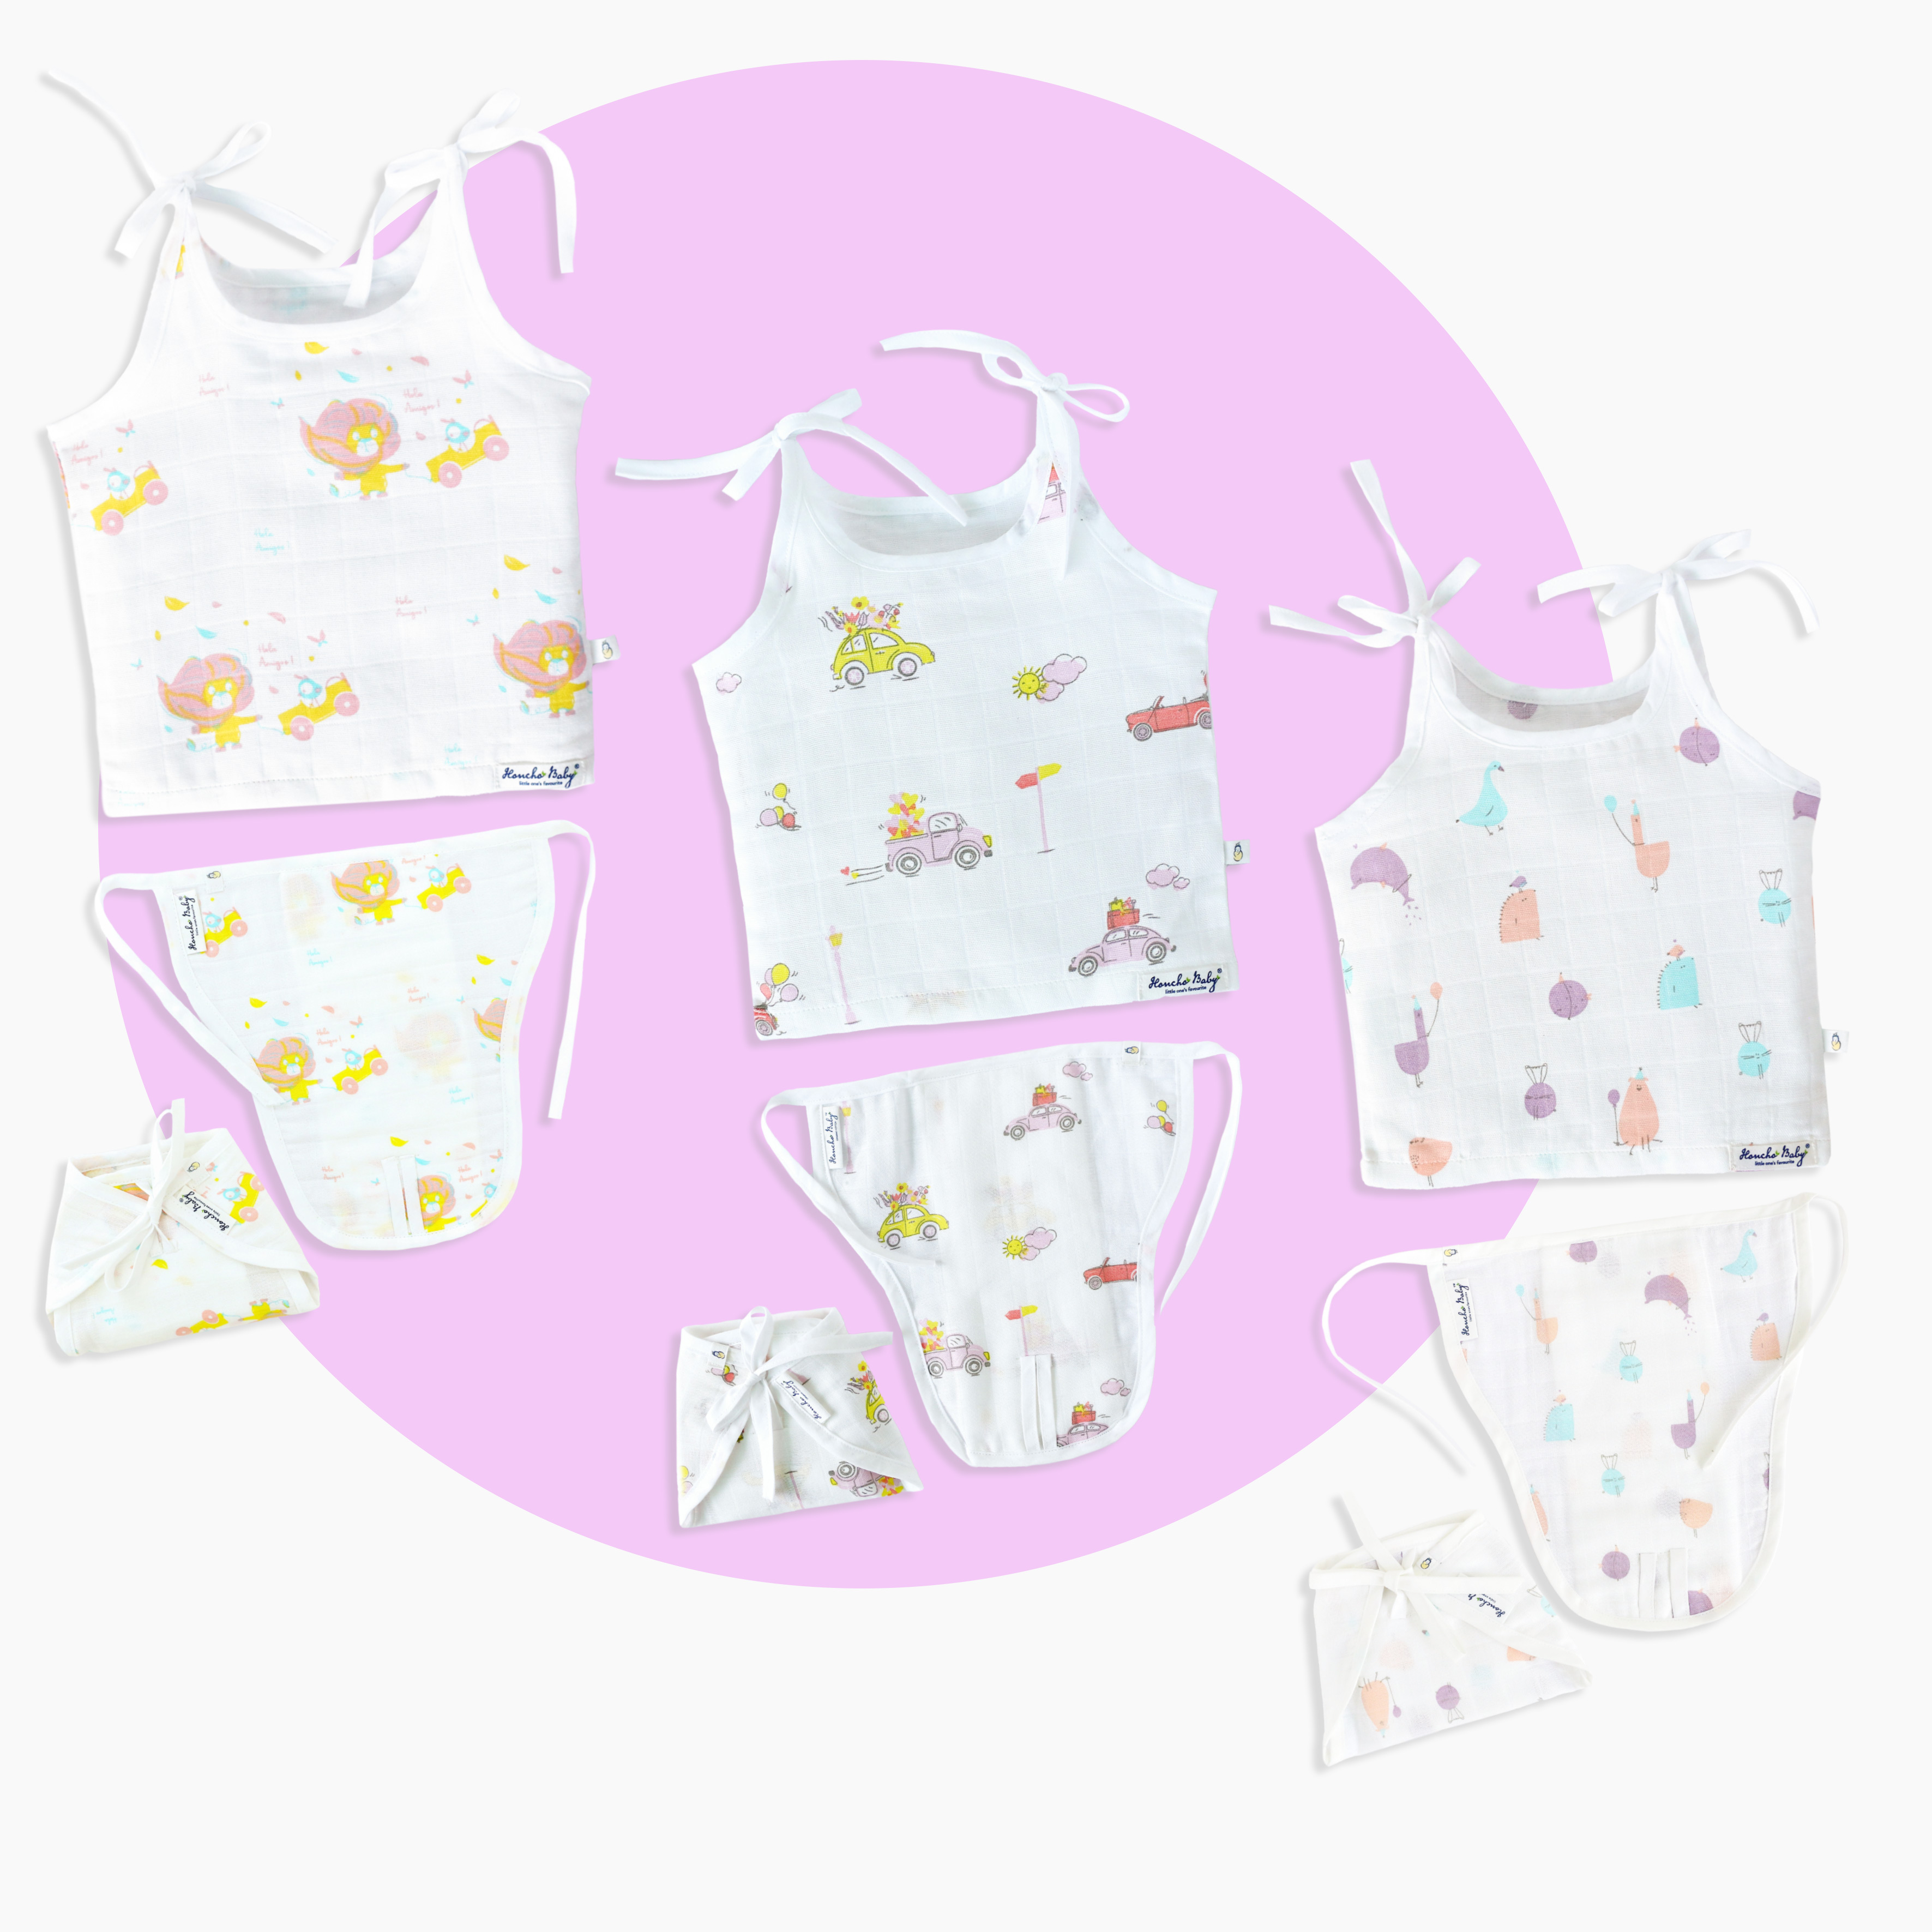 Muslin Unisex Knot Jablas - 3 & Nappies -3 (Assorted Pack of 6) newborn to 4 months